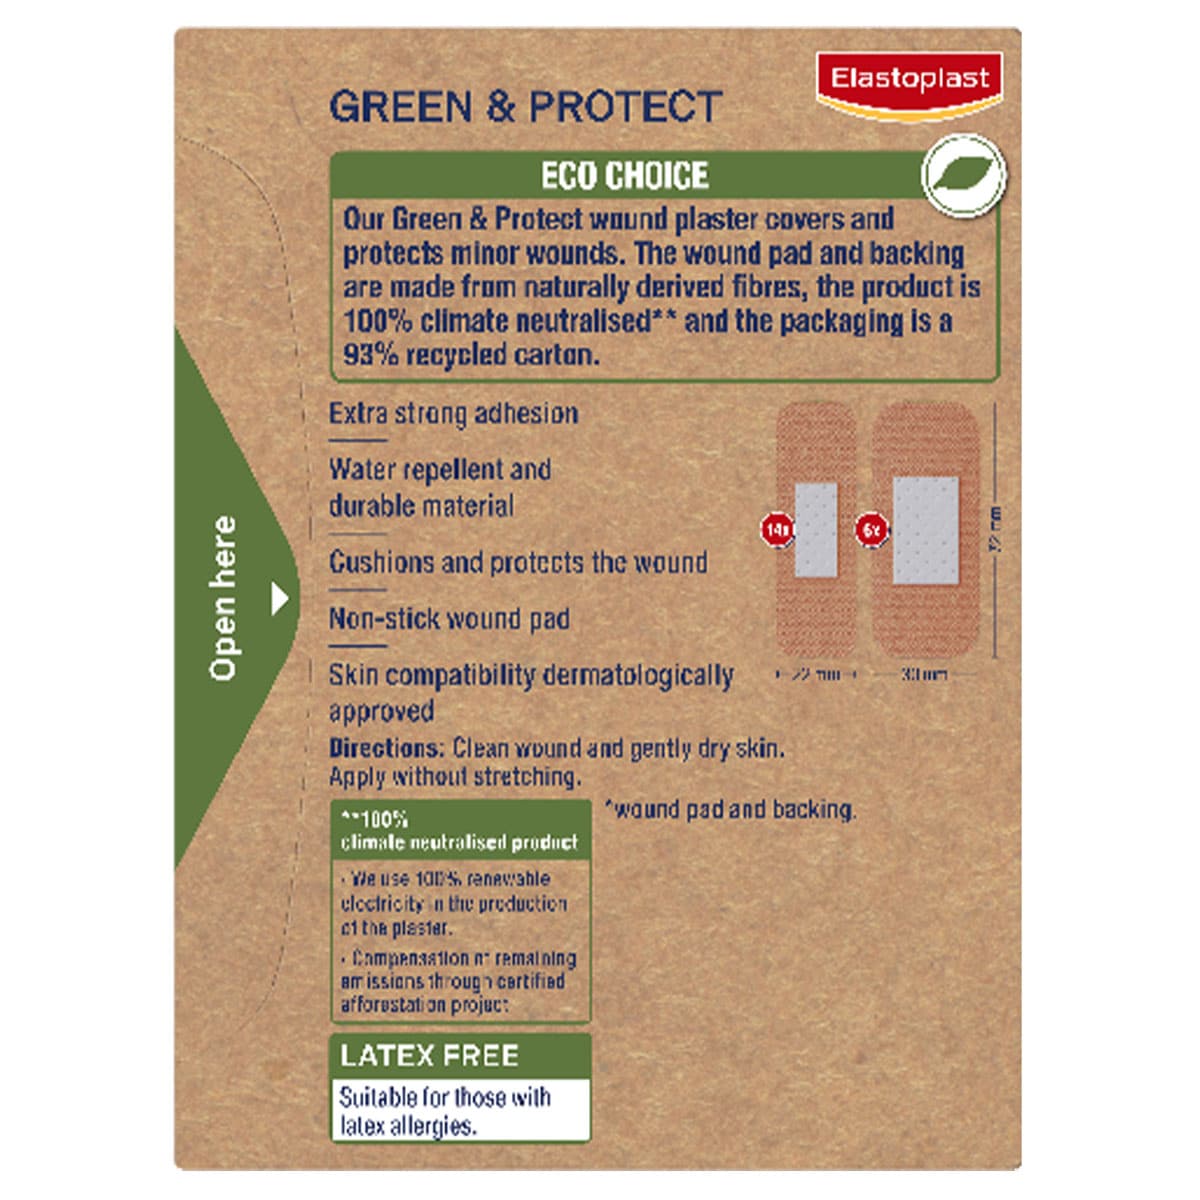 Elastoplast Green & Protect Wound Strips 20 Pack